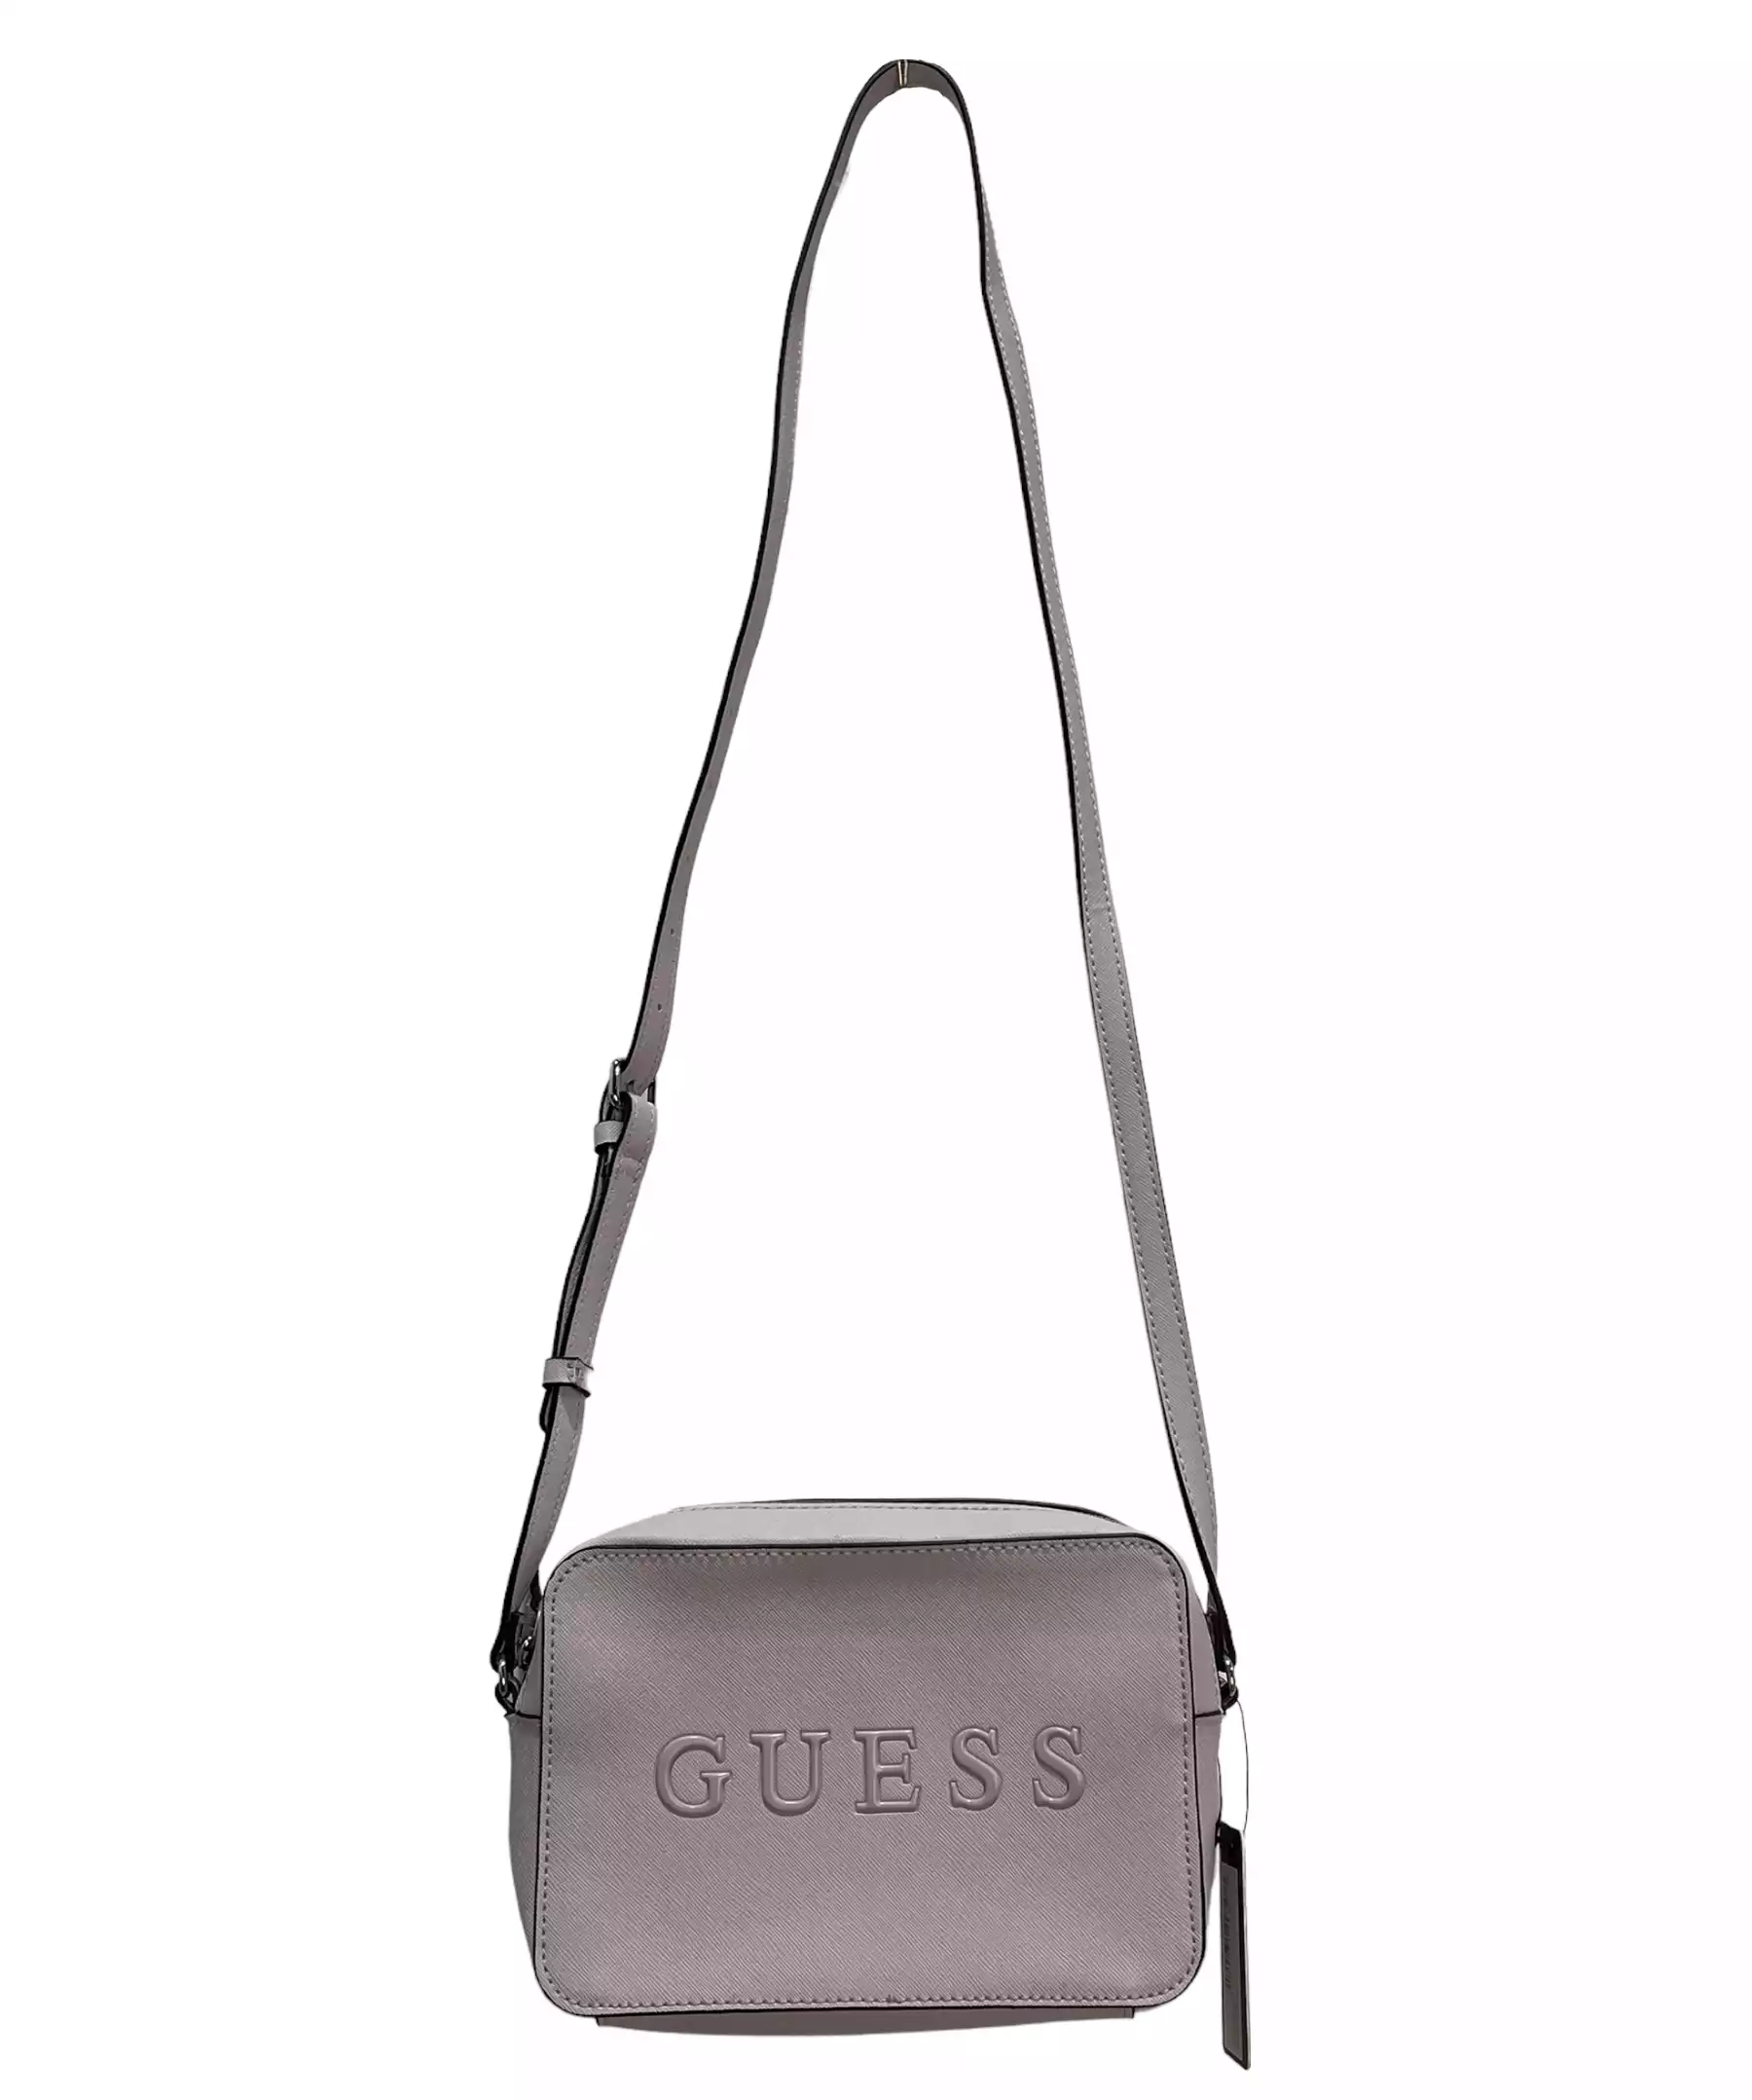 Sling bag by Guess